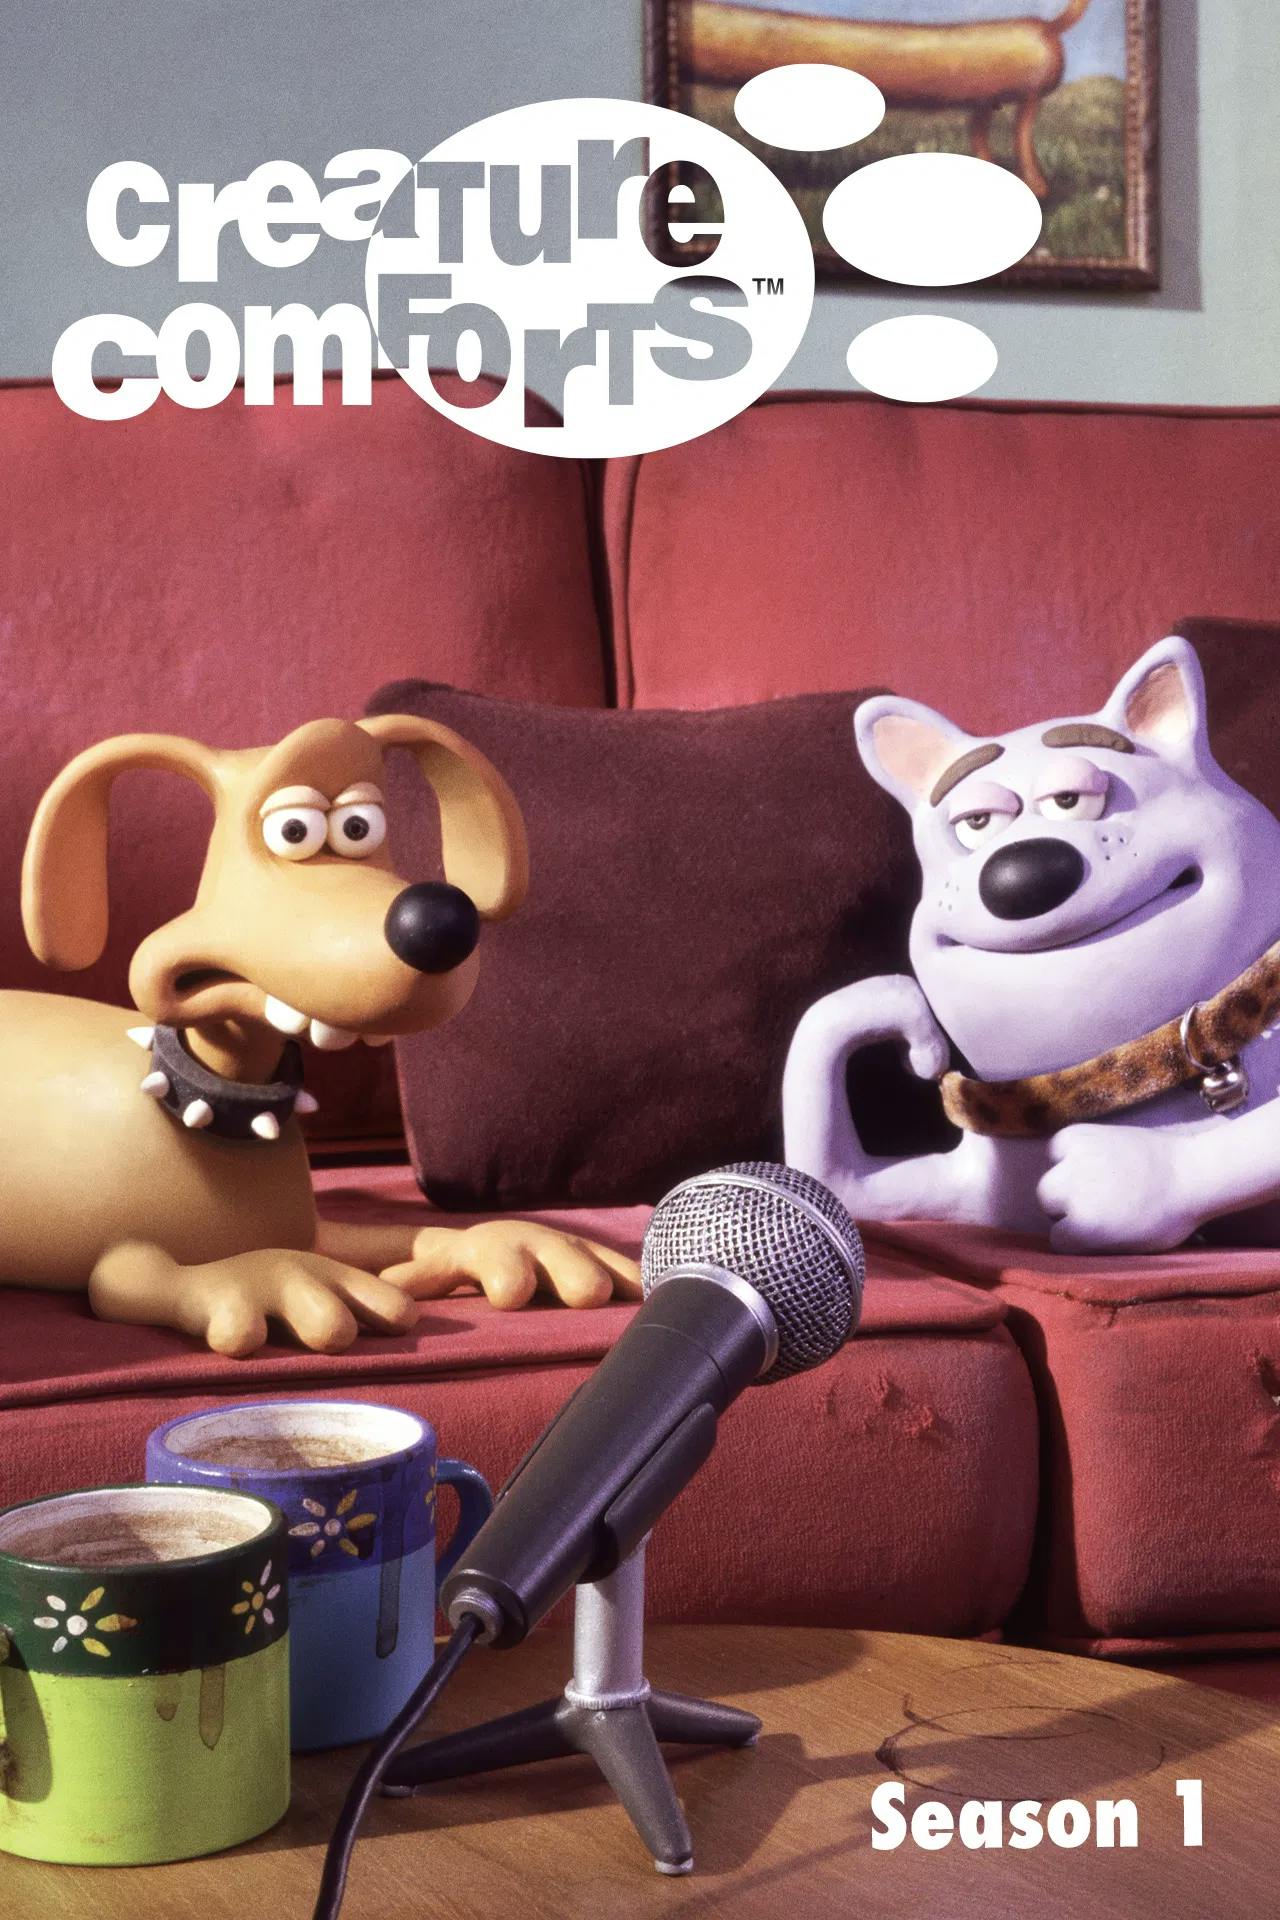 Creature Comforts poster